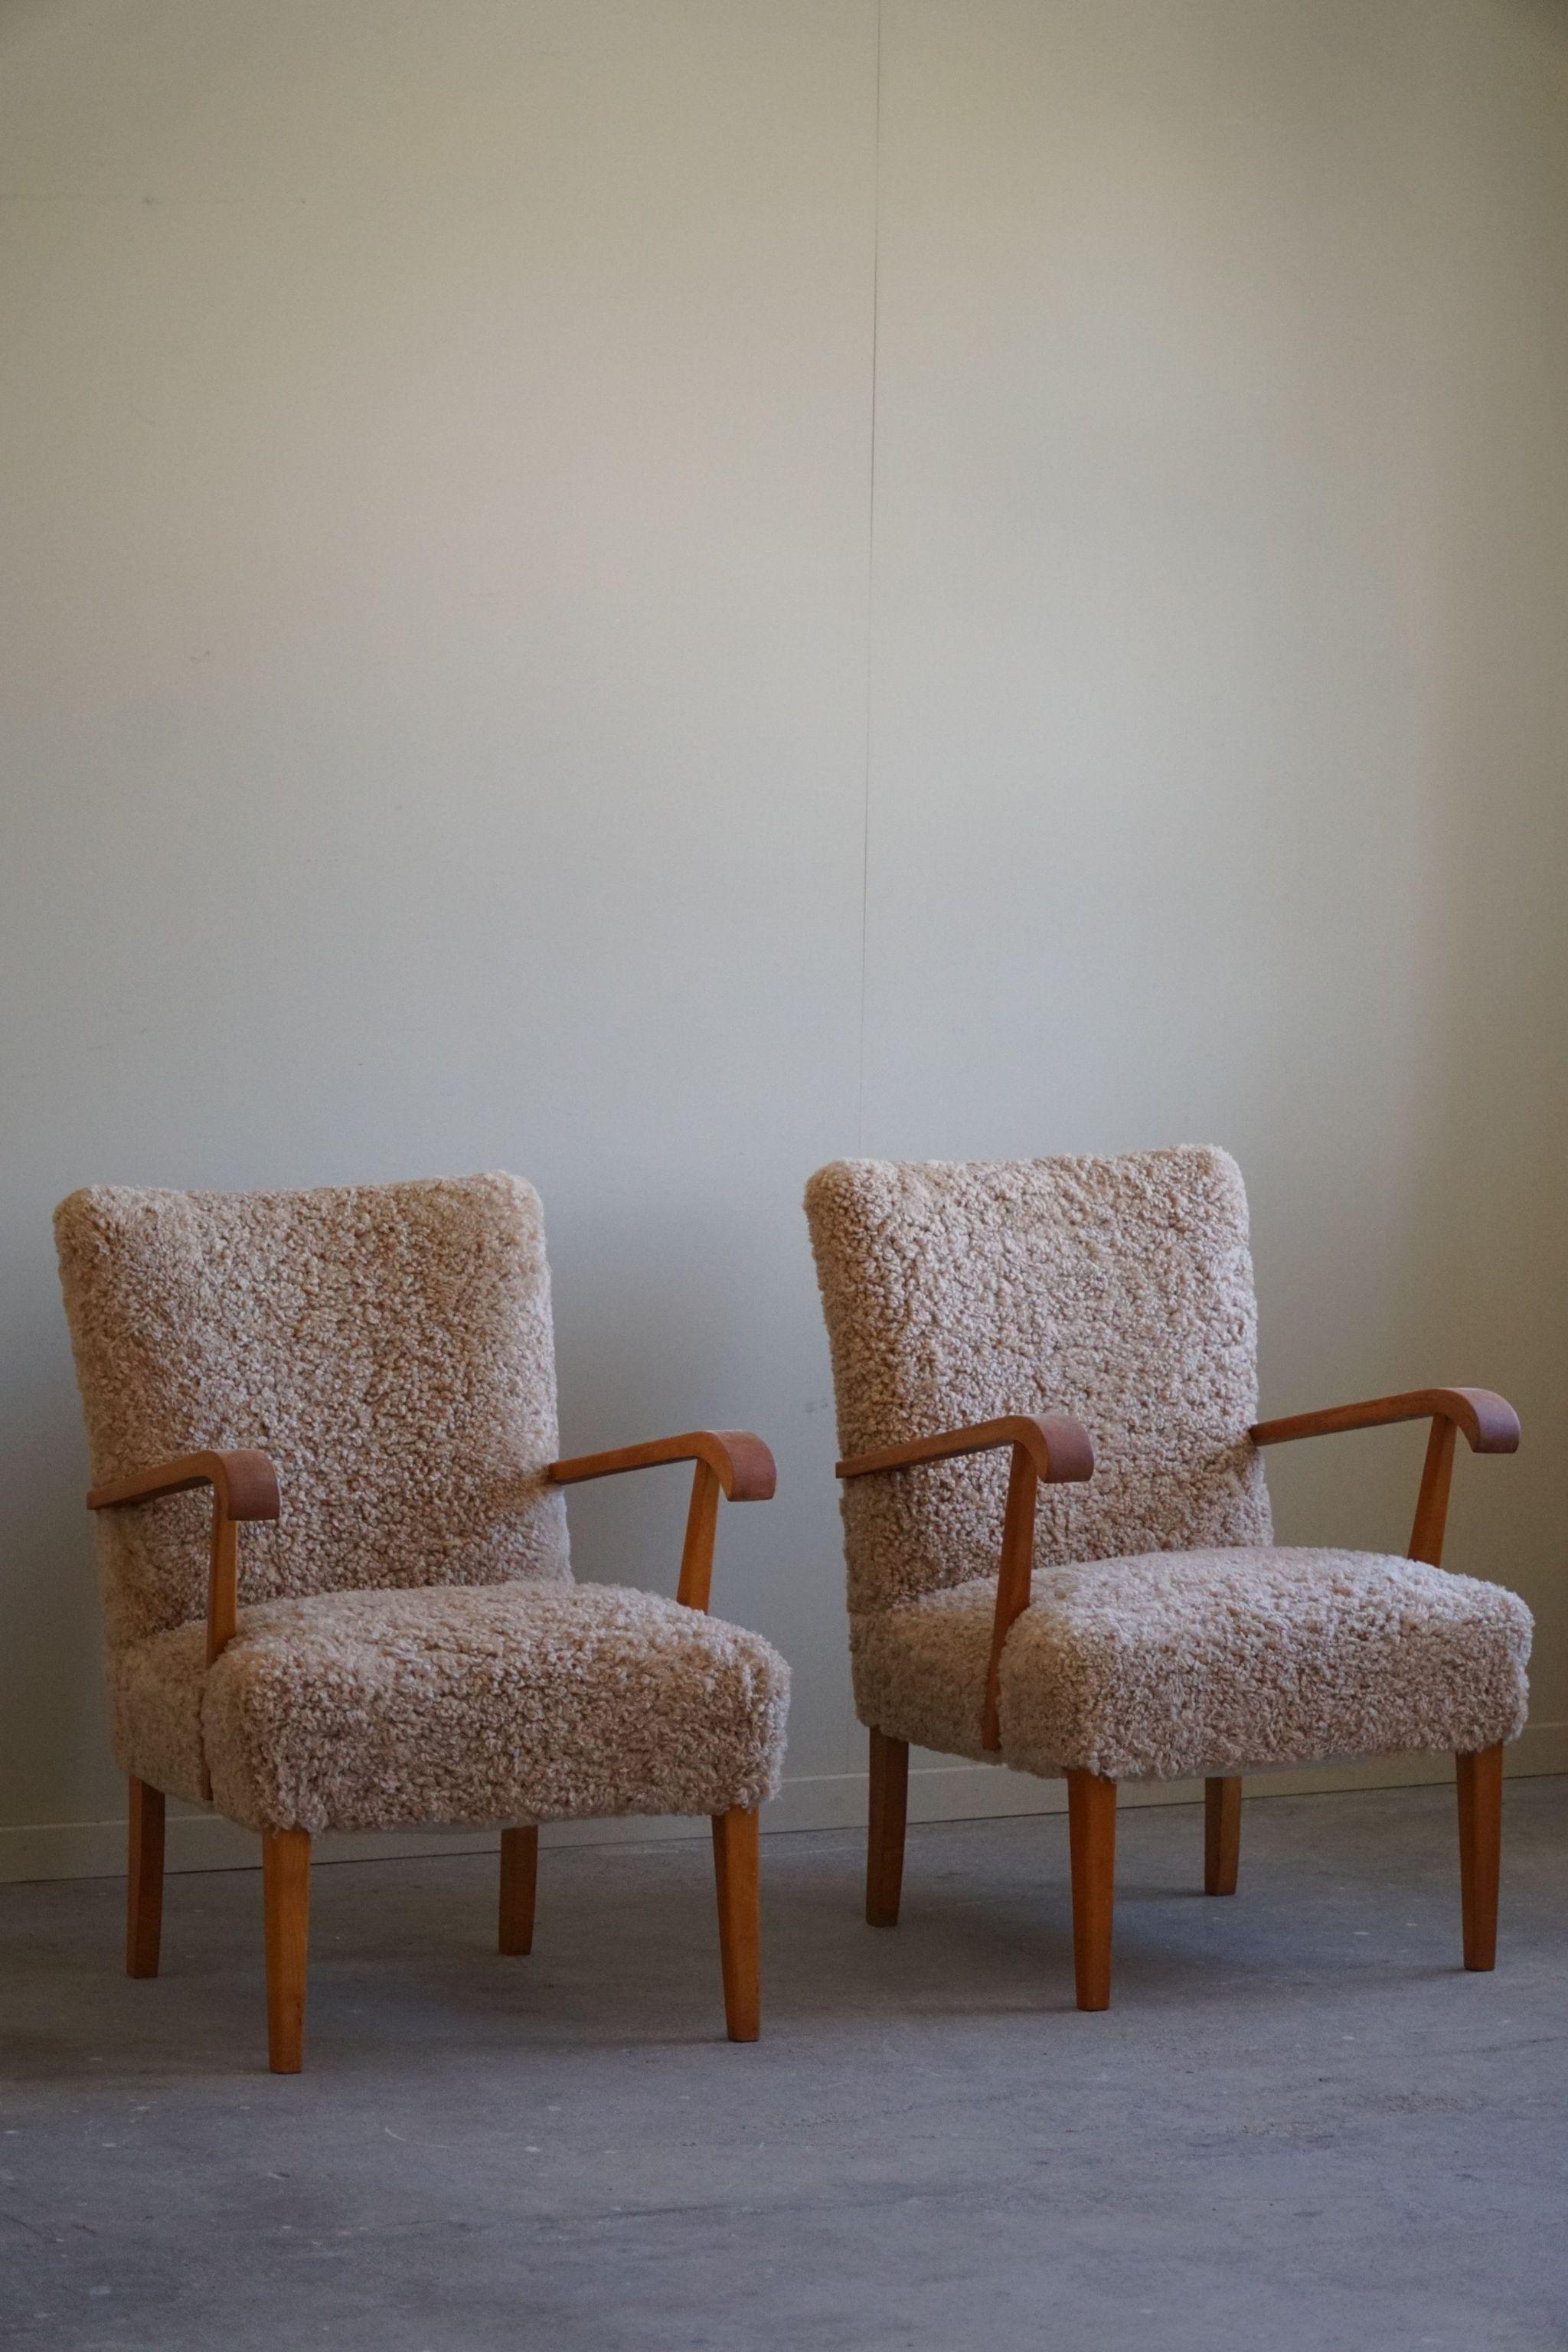 Hand-Crafted Pair of Danish Mid Century Modern Lounge Chairs in Beech & Lambswool, 1960s For Sale